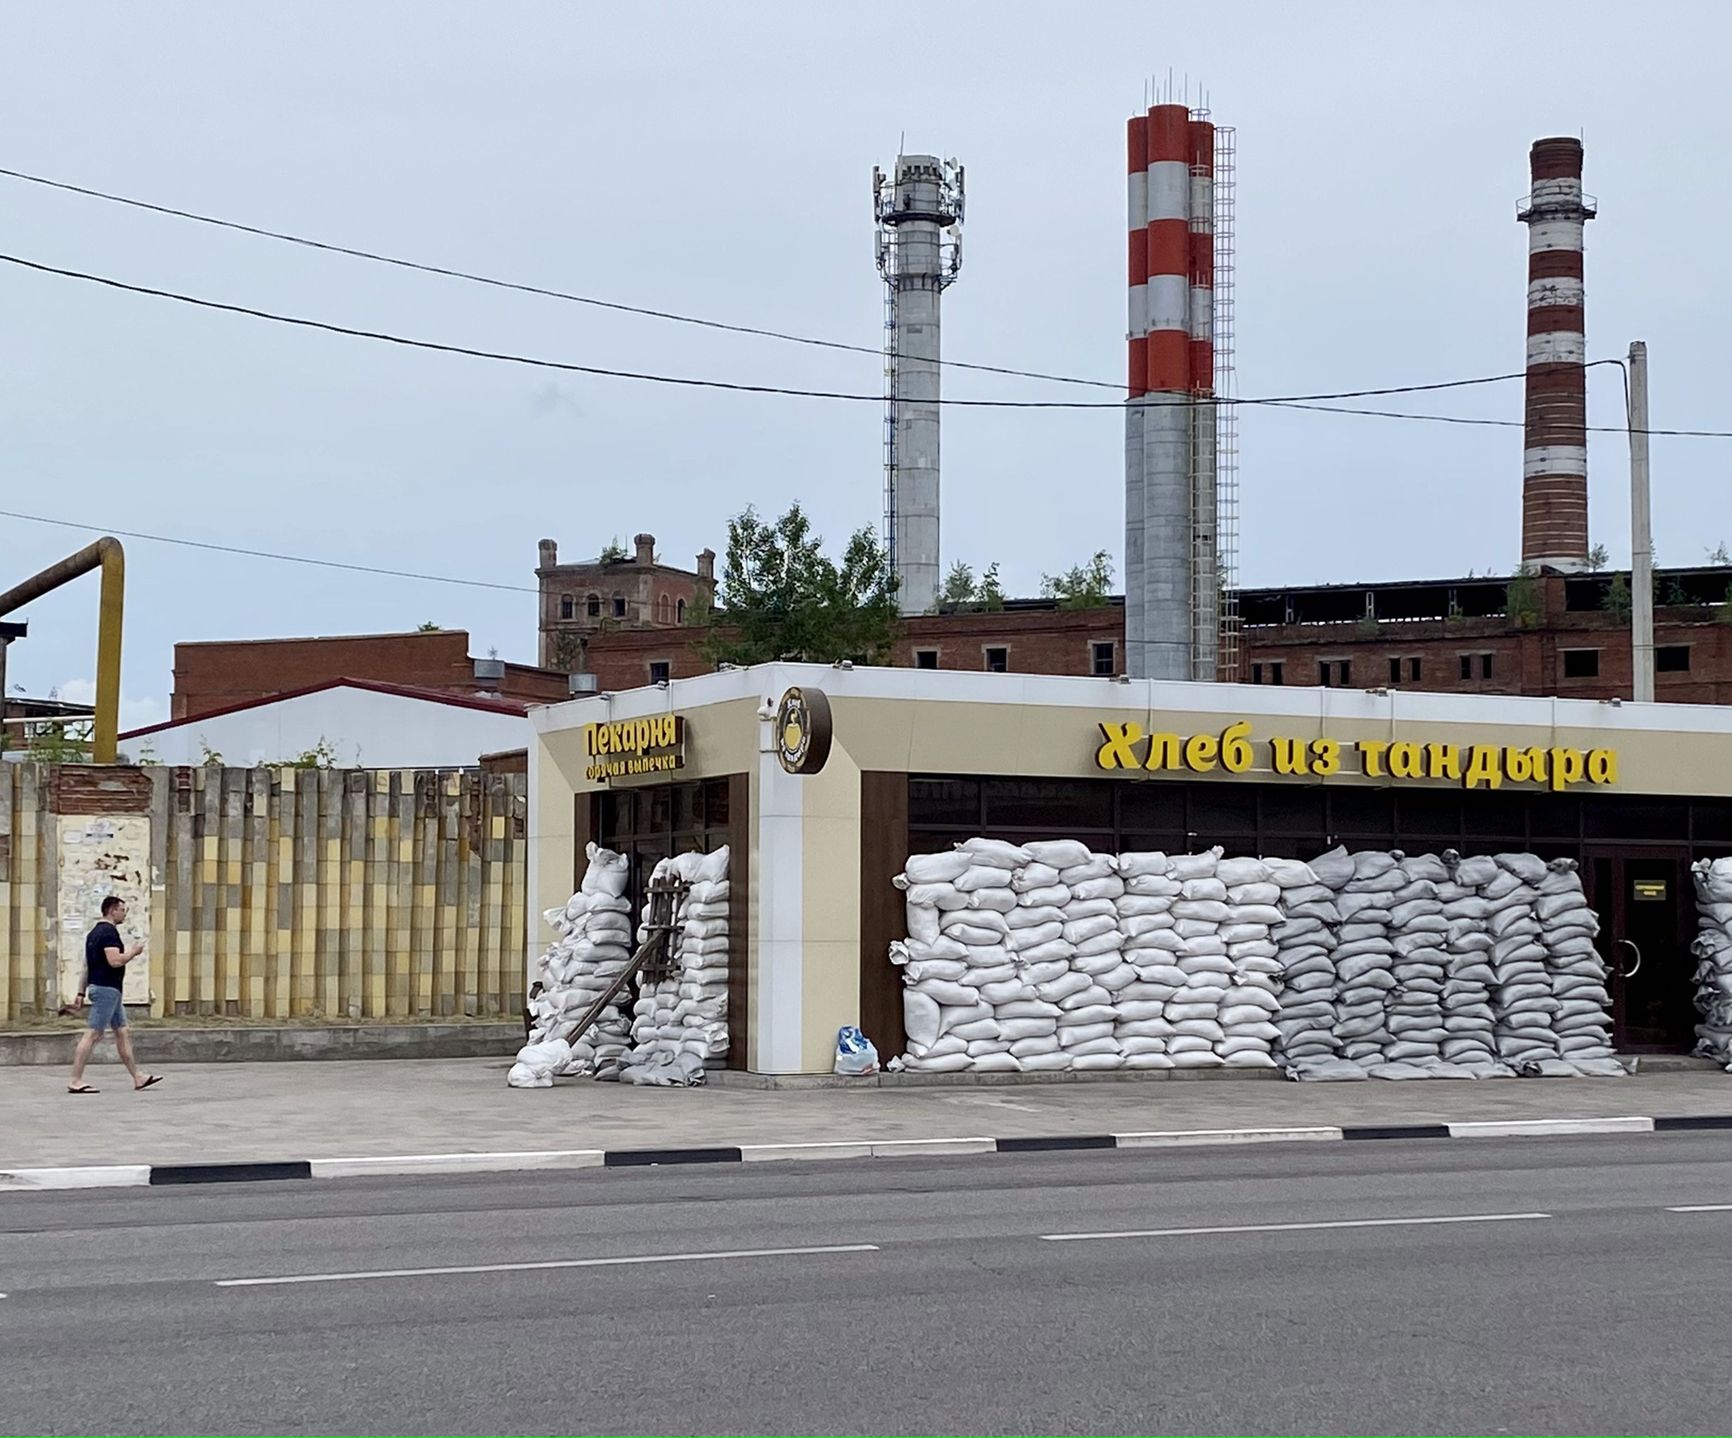 Attempts to save a building in Shebekino with sandbags